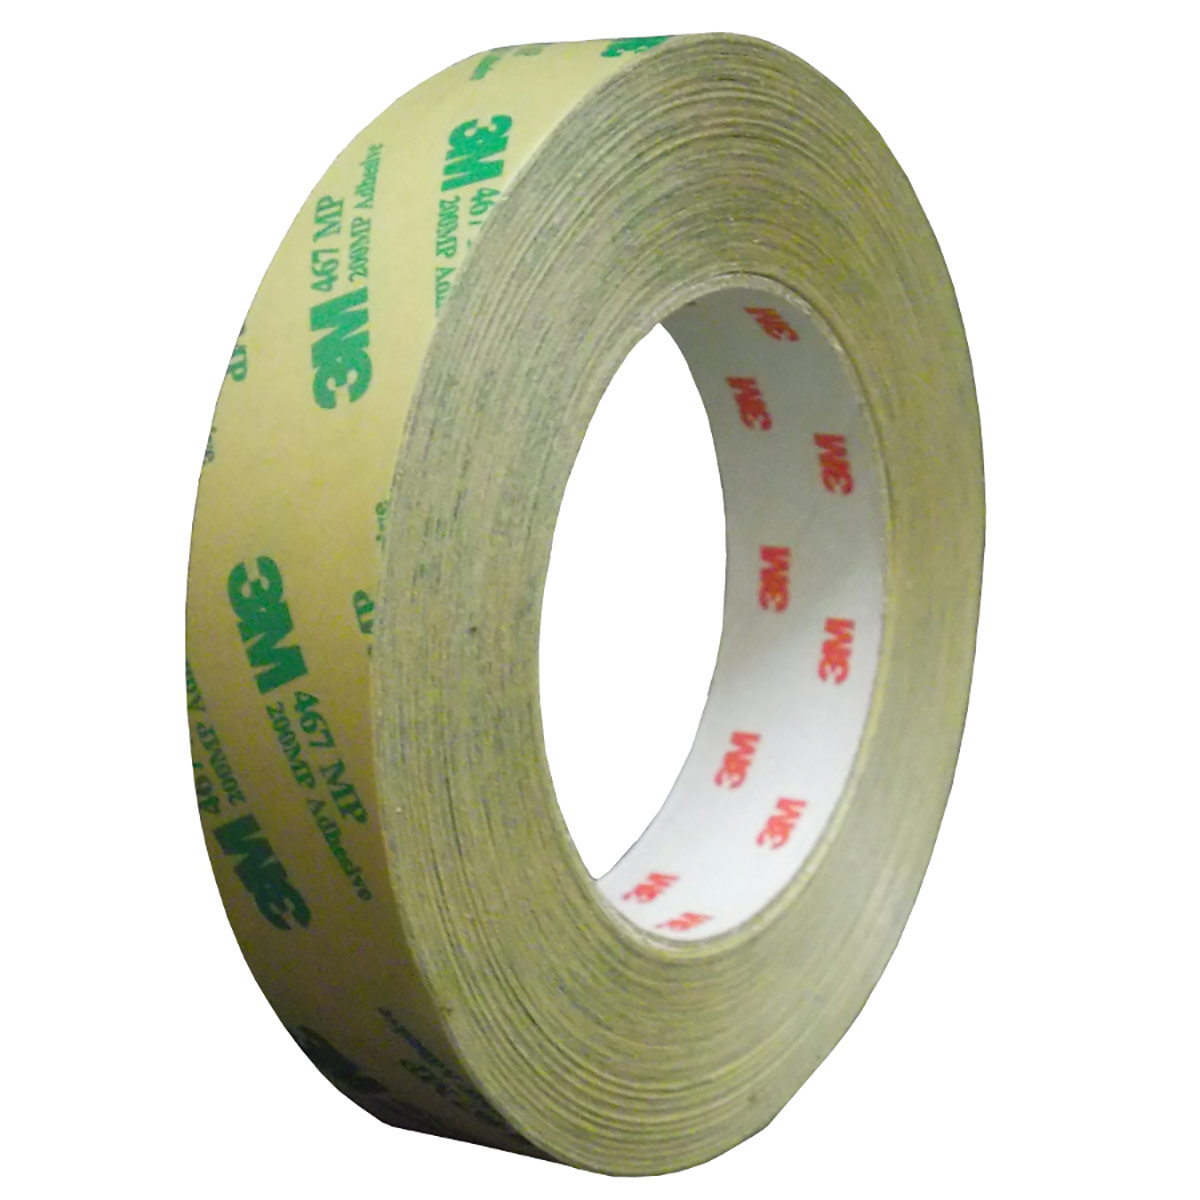 A roll of 3M 467MP Double Sided Transfer Tape cut to size at Associated Gaskets.